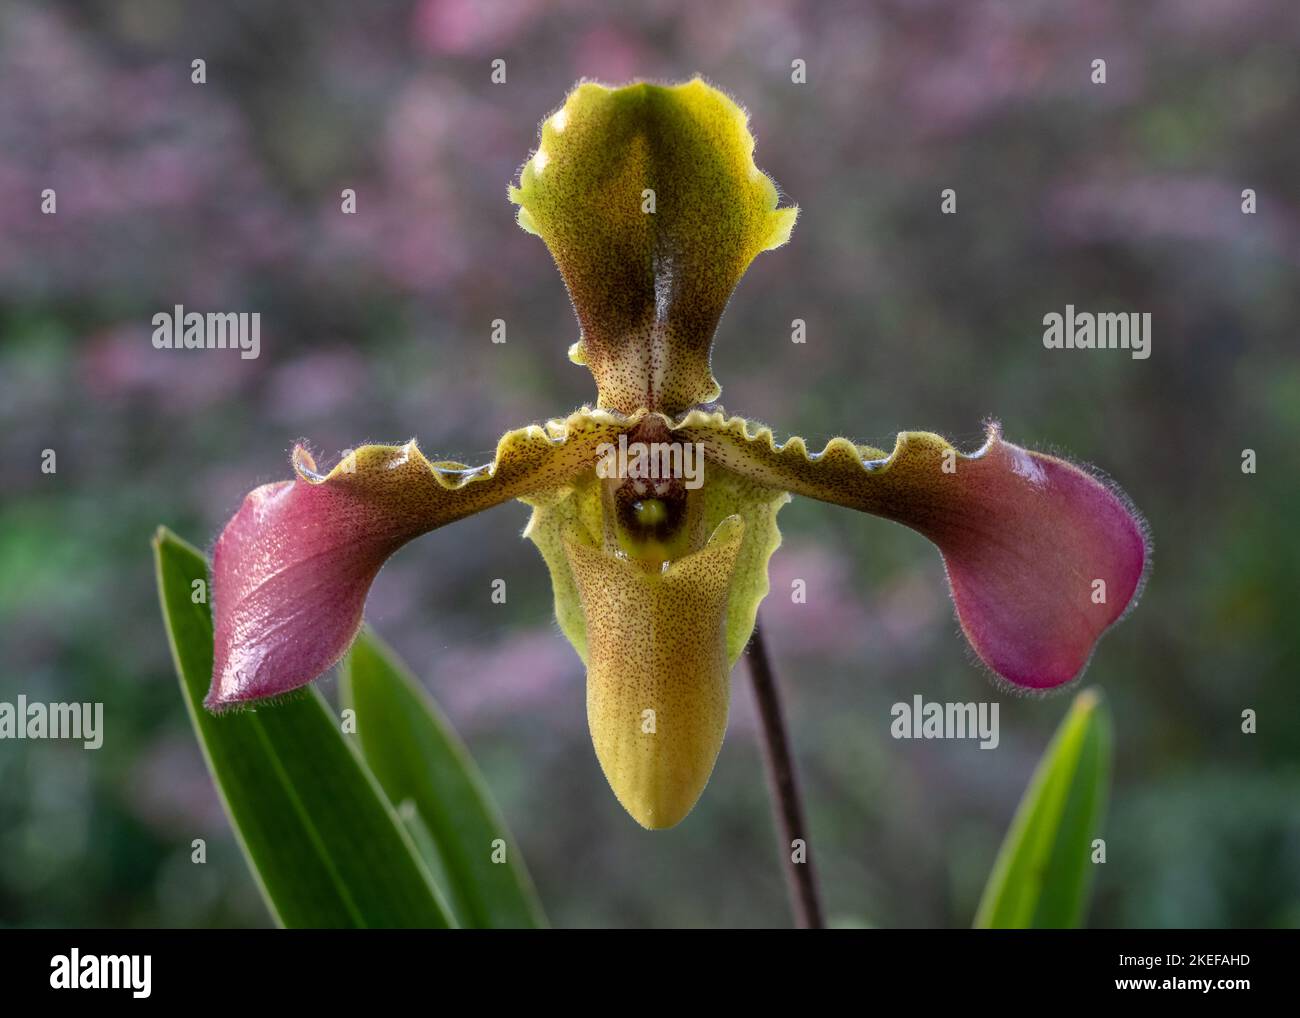 Closeup view of yellow green and purple red lady slipper orchid species paphiopedilum hirsutissimum var. esquirolei flower on natural background Stock Photo